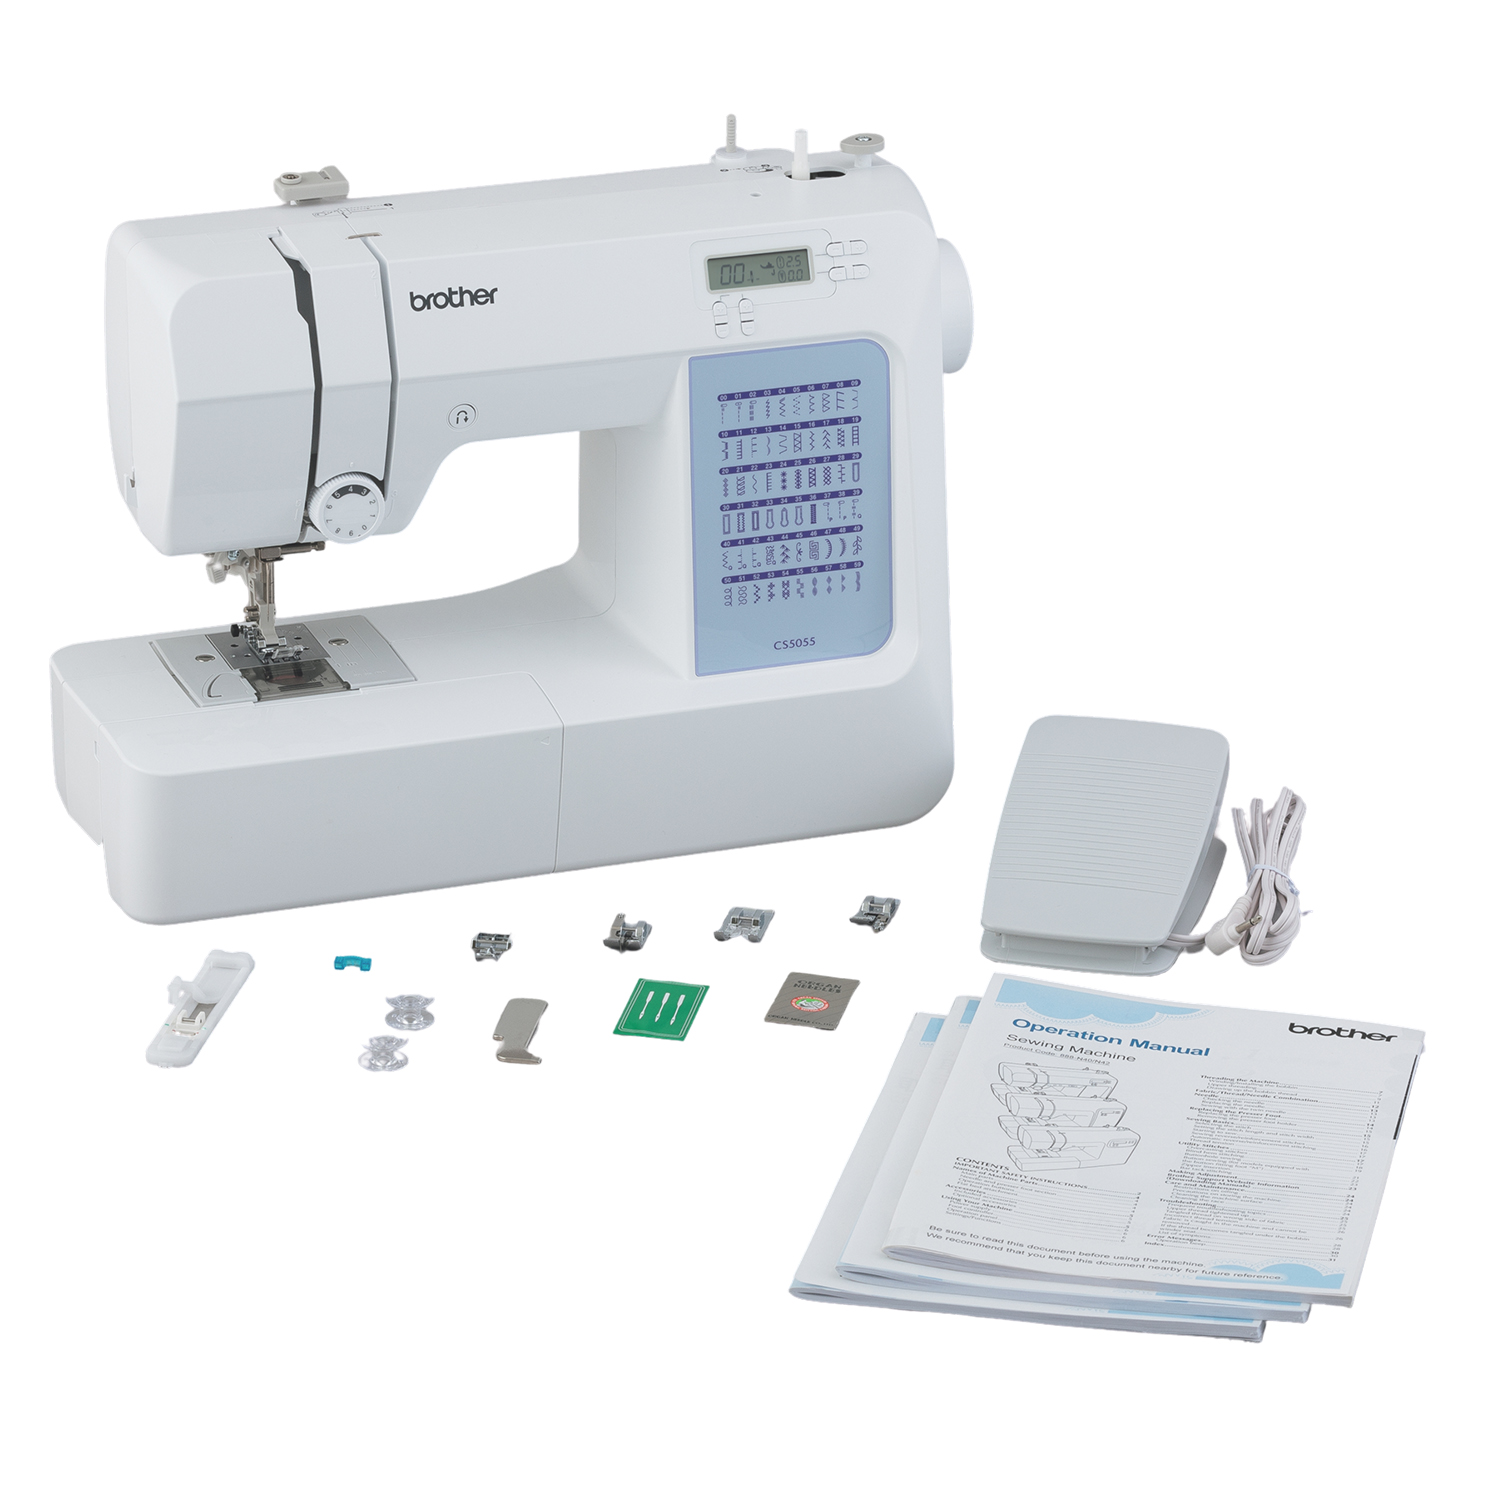 Brother CS5055 Computerized Sewing Machine with 60 Built-in Stitches - image 1 of 10